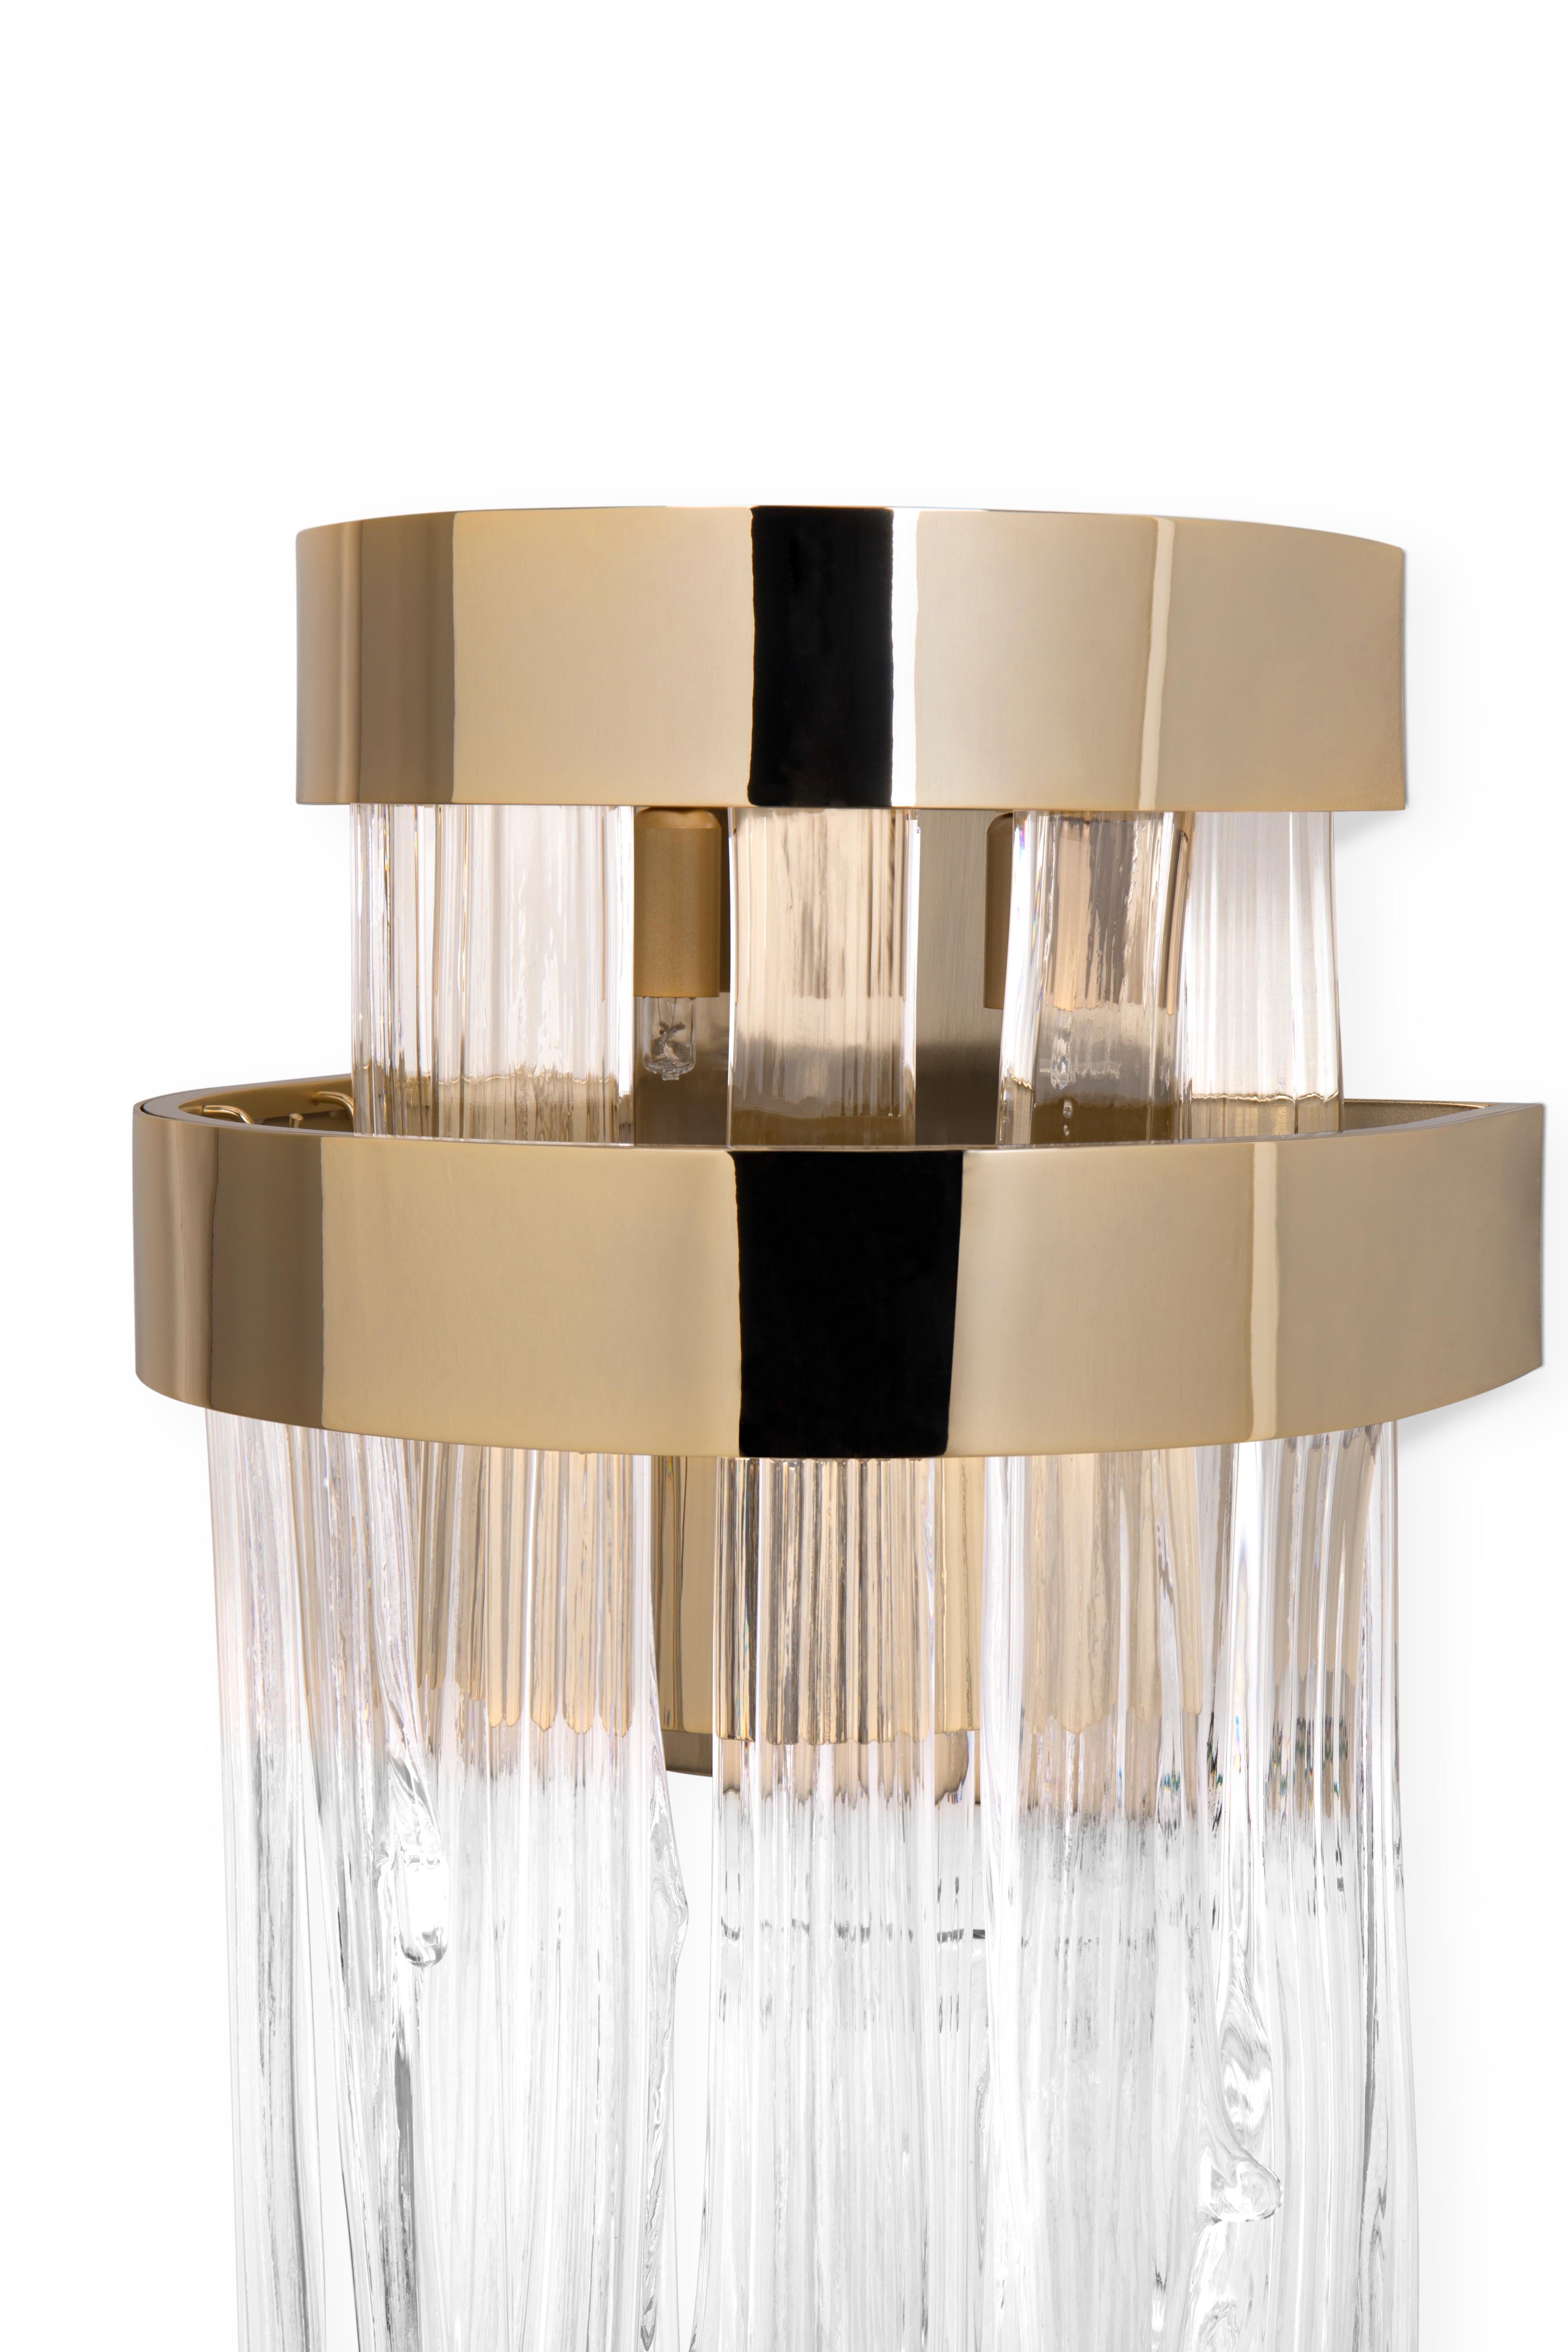 An original and exquisite décor fixture with an unmistakable presence, Babel wall lamp adds a classical appeal to any environment. The craftsman’s crystal work singularity shines back in the circular surfaces where smooth, glamorous shades are